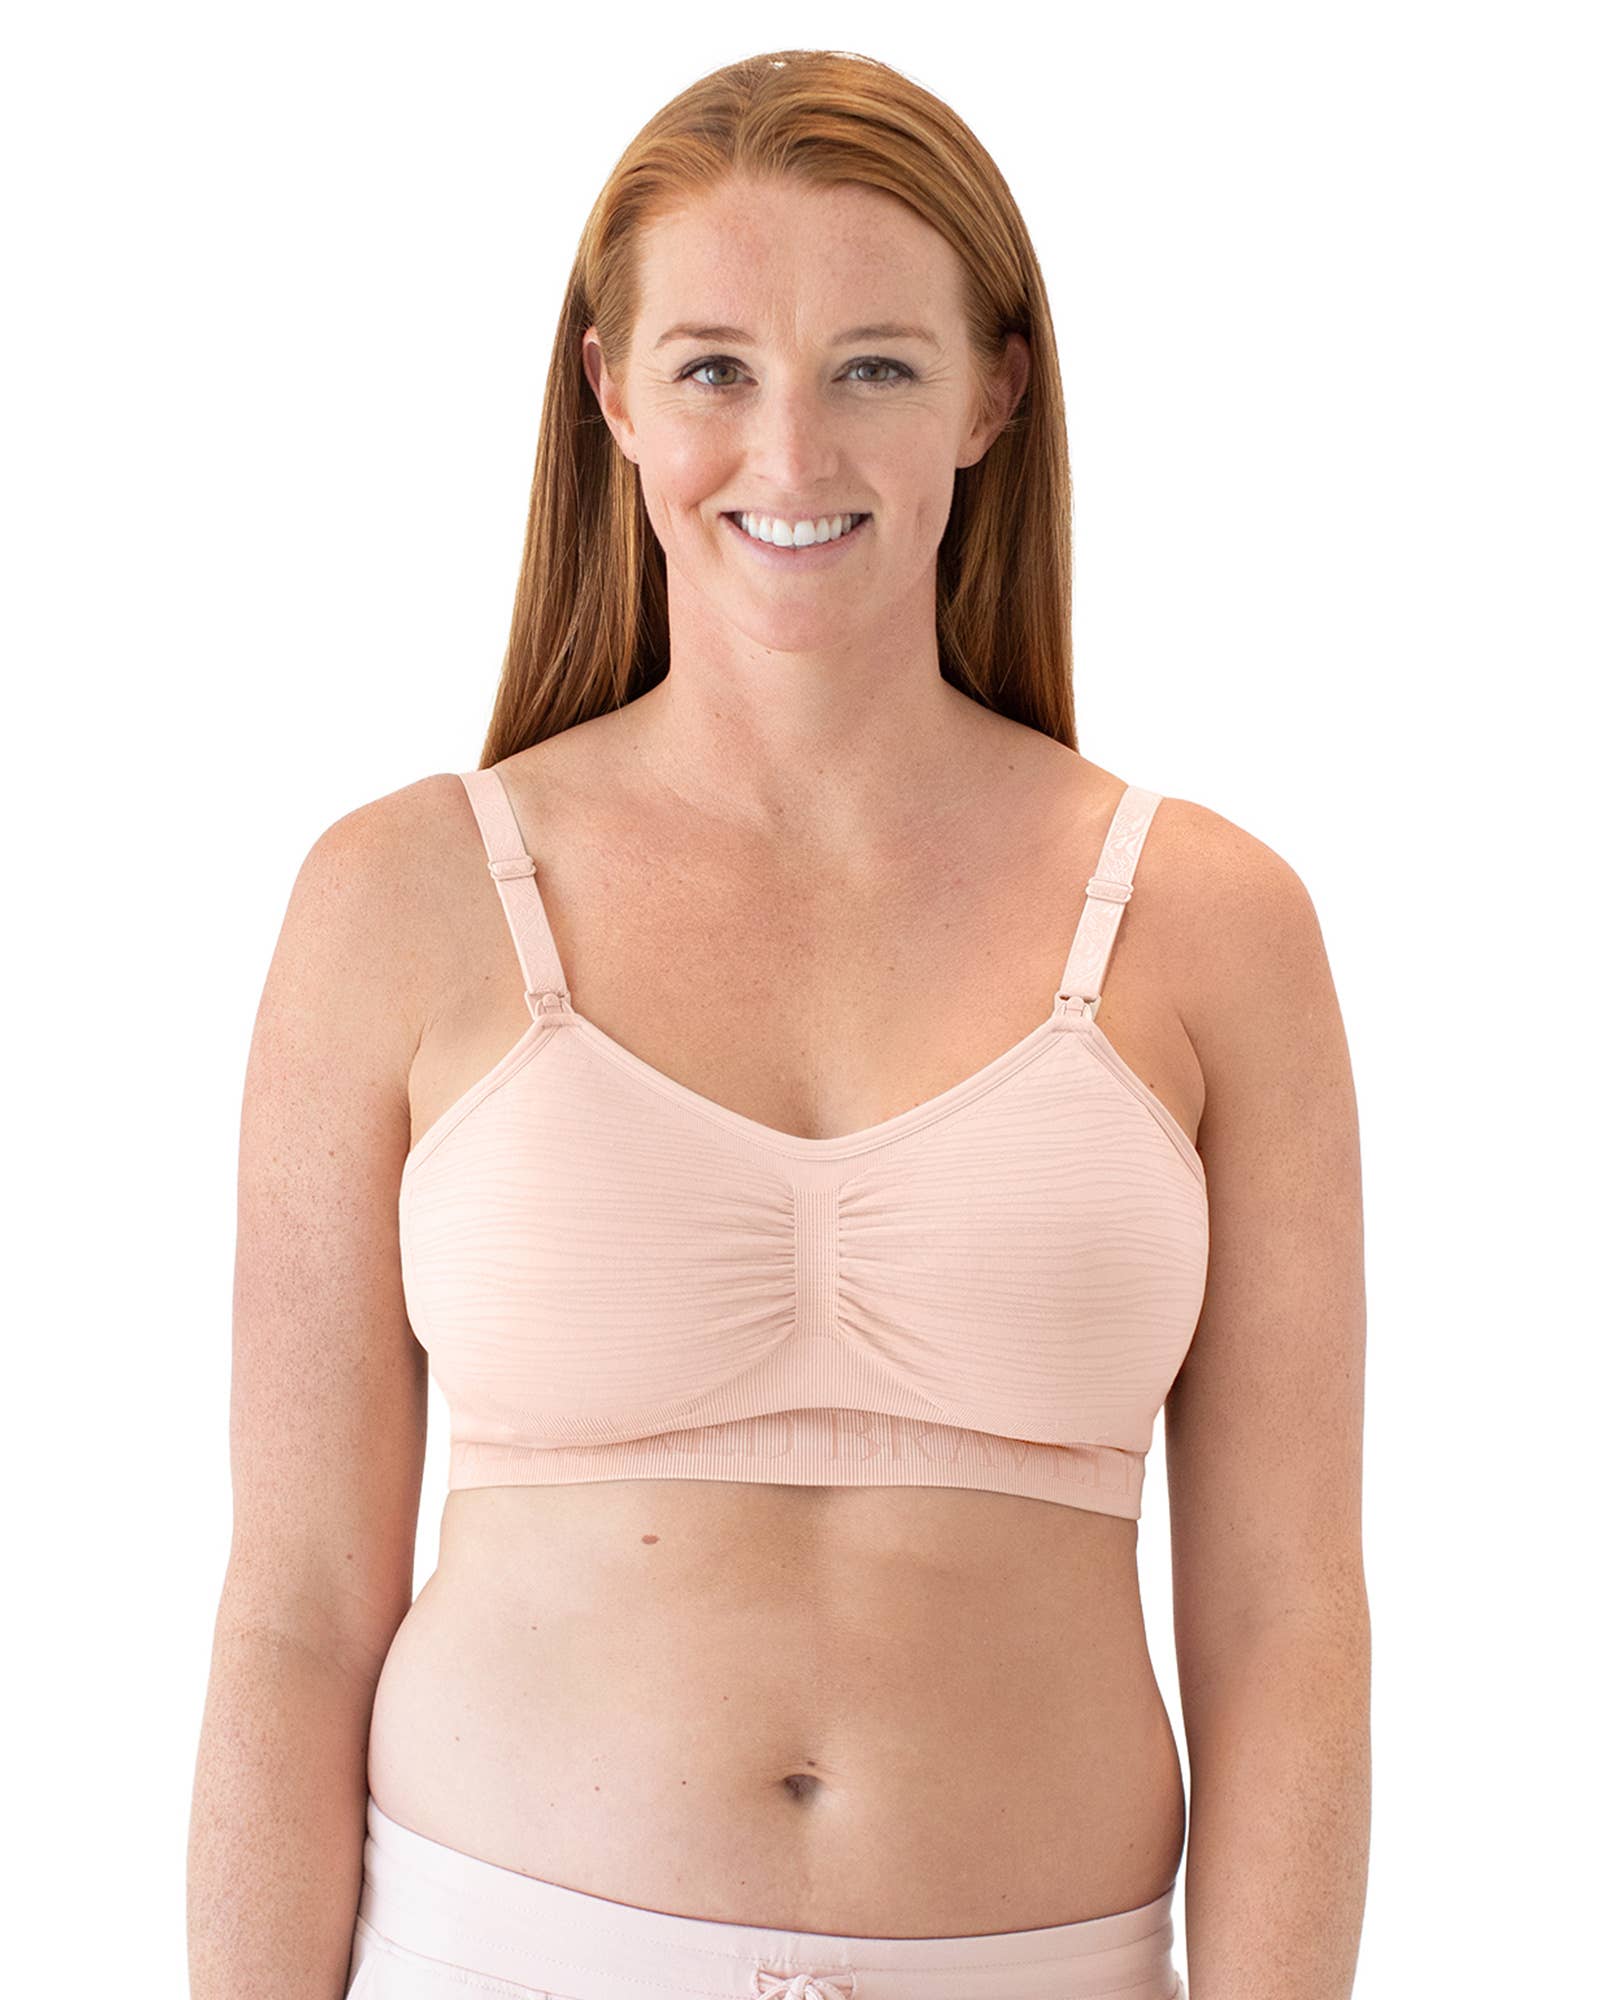 Bodily - Nursing, Pumping, Maternity Bra - Hands-Free and Wearable